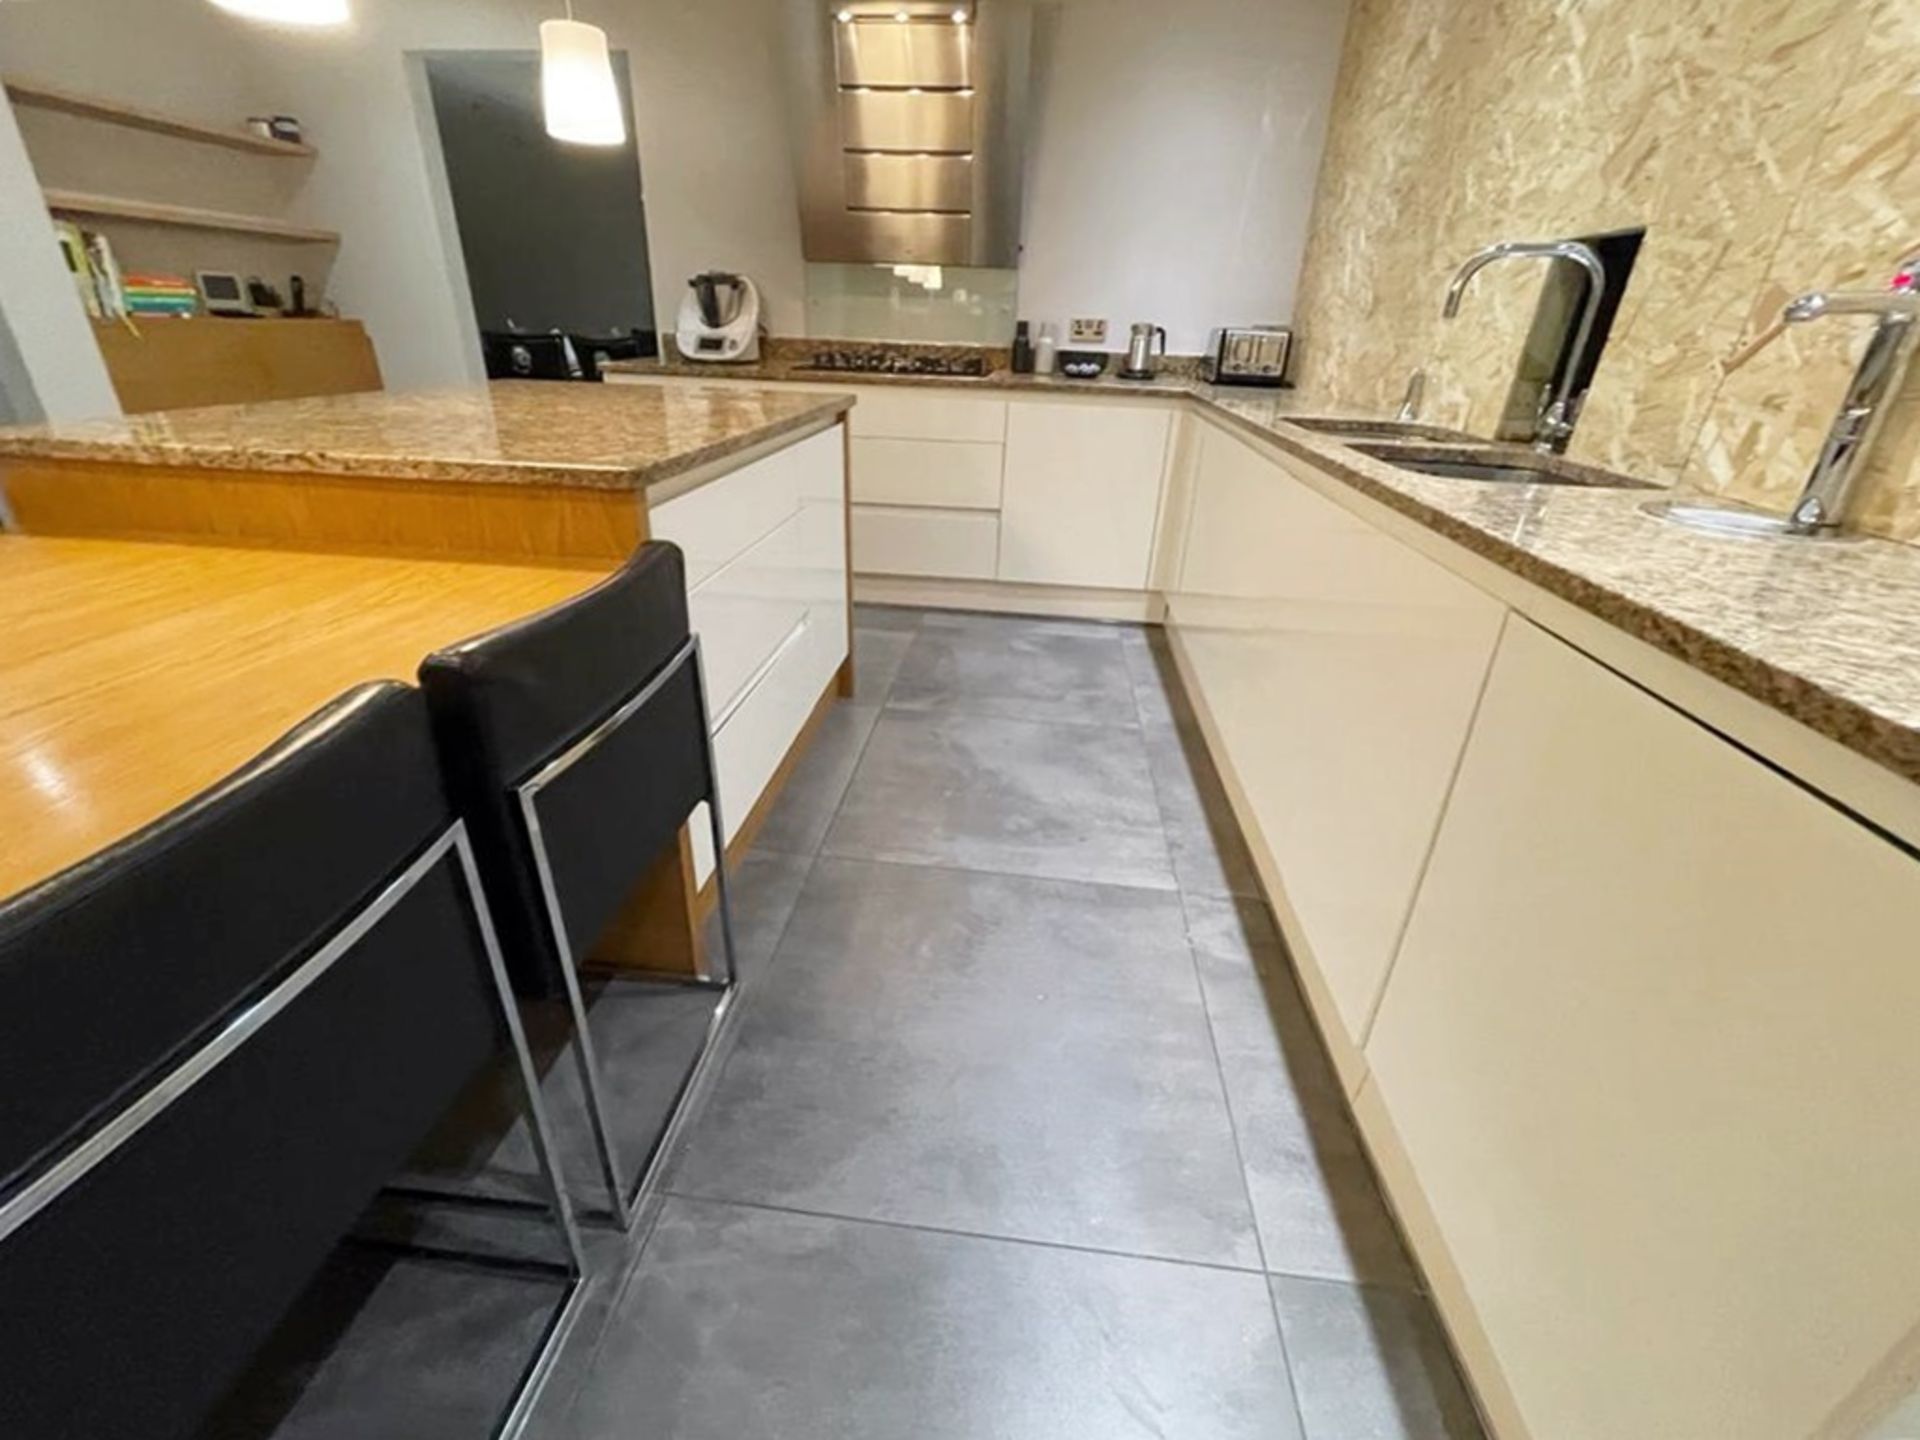 1 x Stunning PARAPAN Handleless Fitted Kitchen with Neff Appliances, Granite Worktops & Island - Image 111 of 126